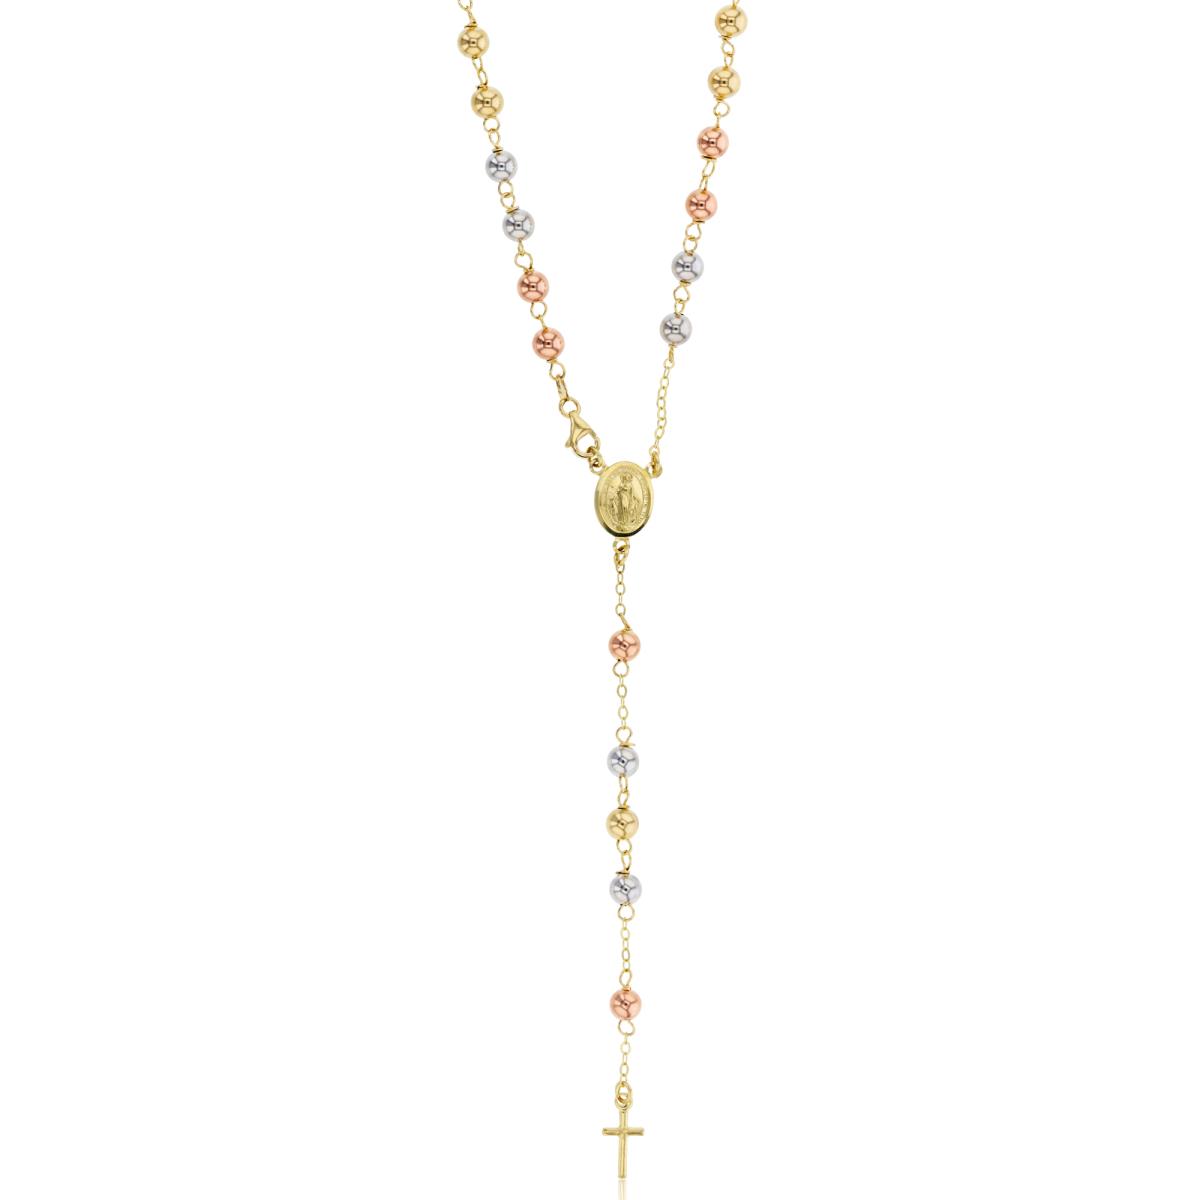 14K Tri-Color Gold Polished 5mm Beads 24" Rosary Necklace